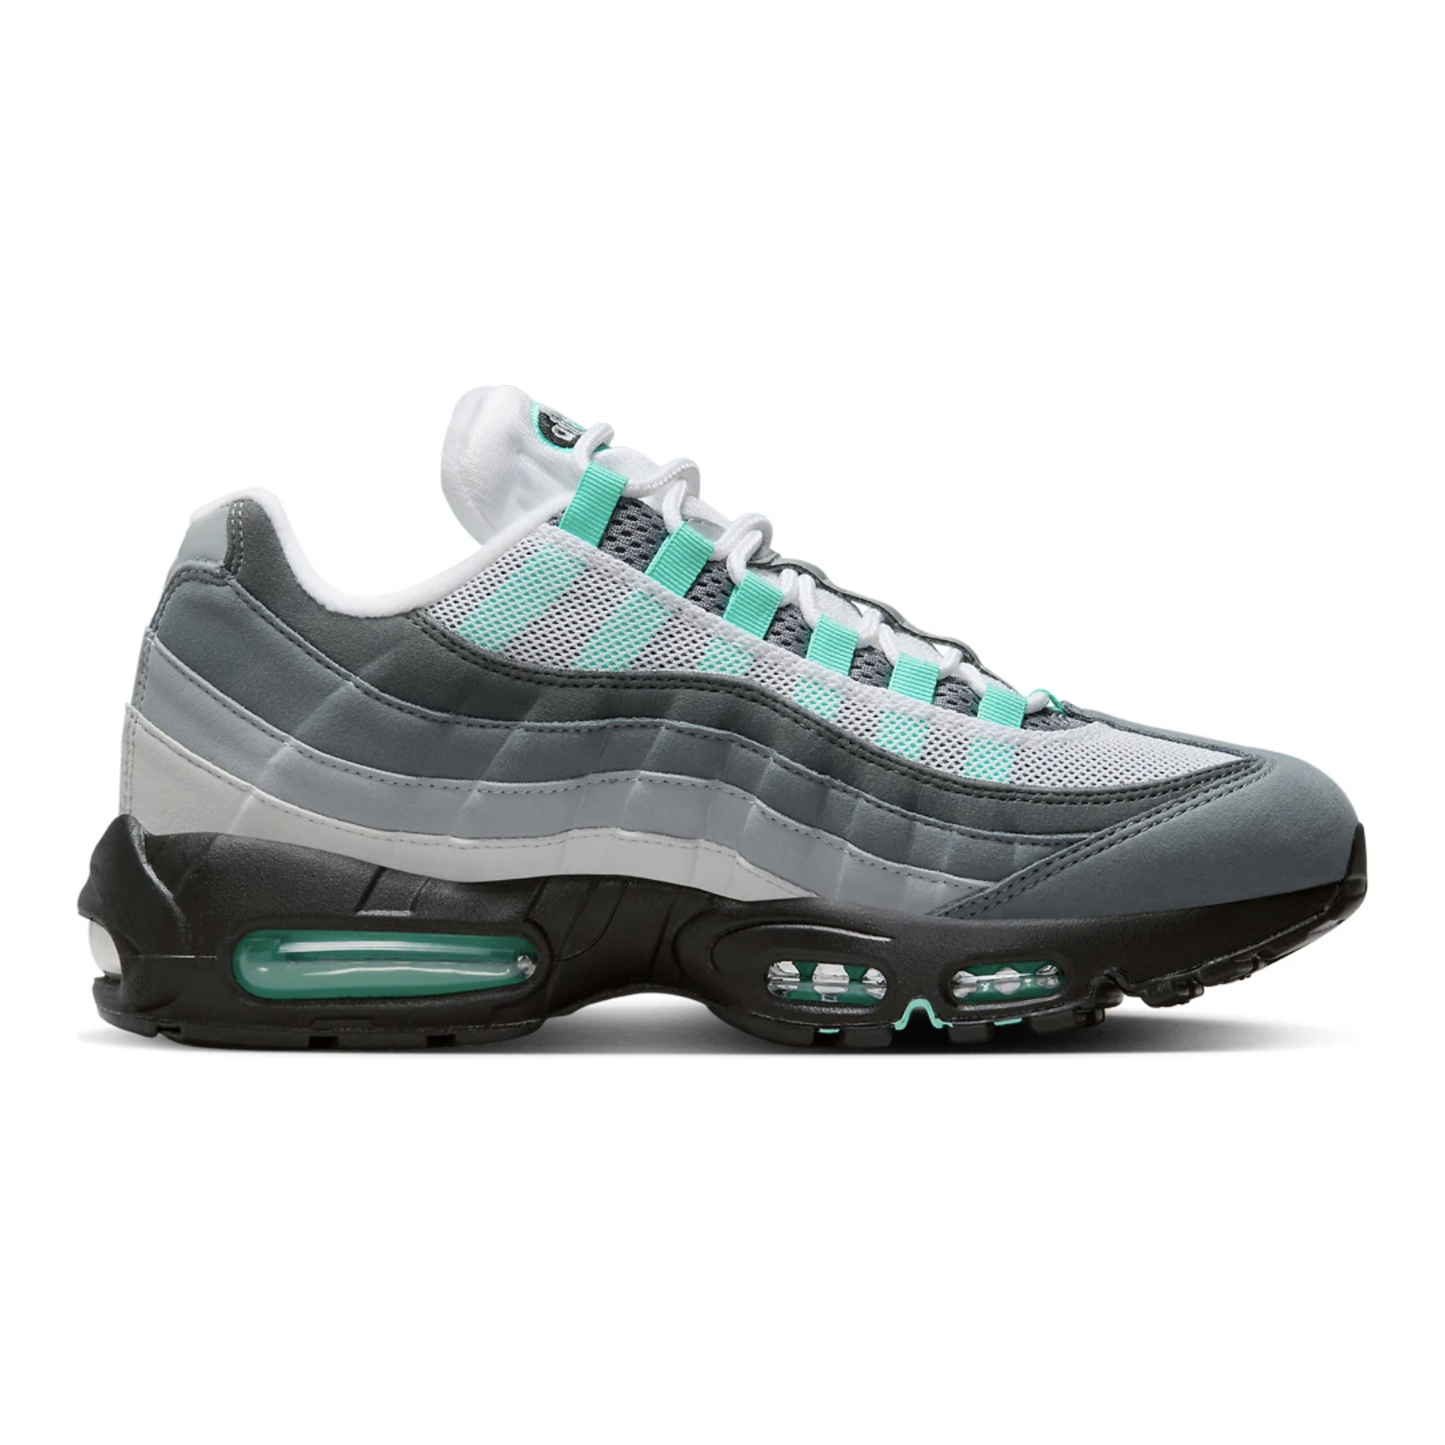 Nike Air Max 95 Hyper Turquoise by Nike from £245.00